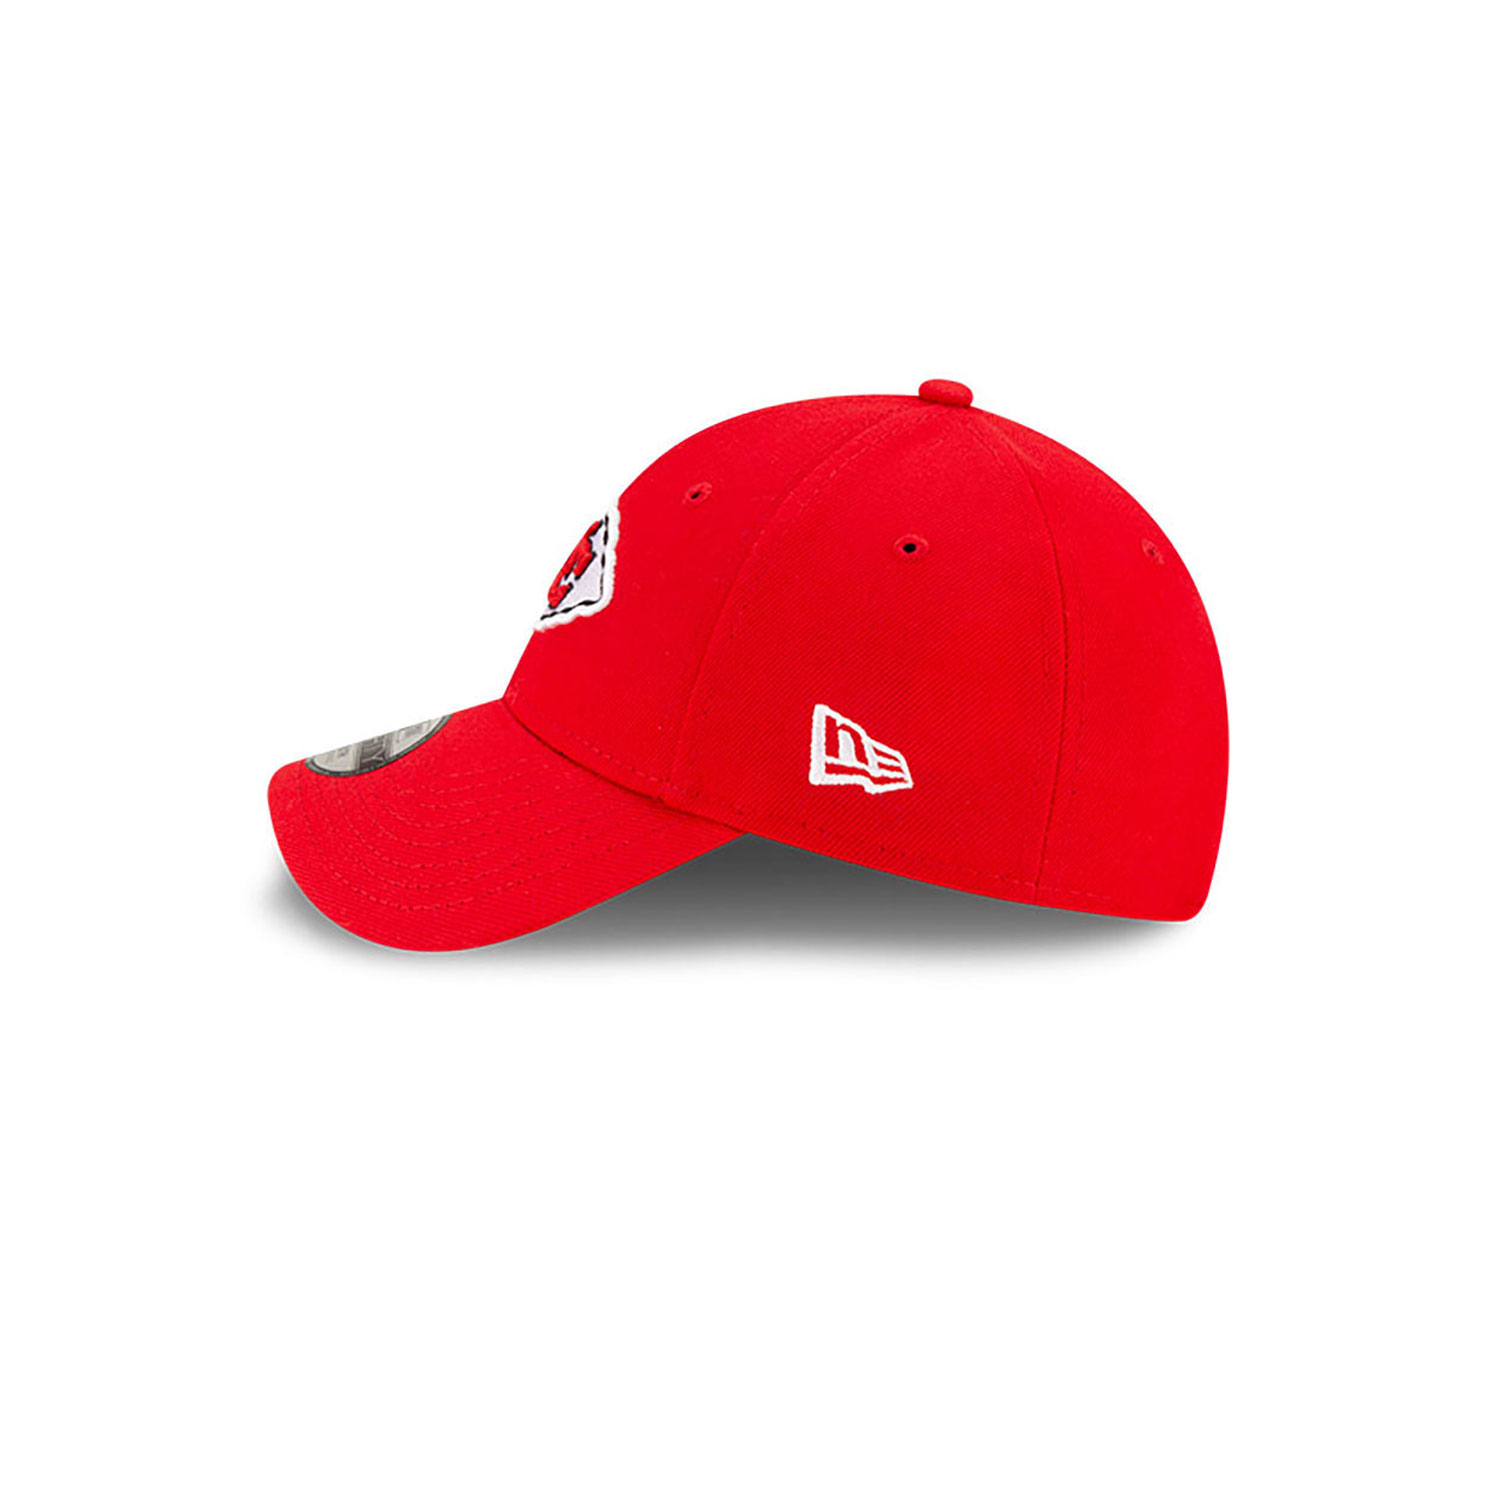 Kansas City Chiefs Youth The League Red 9FORTY Adjustable Cap